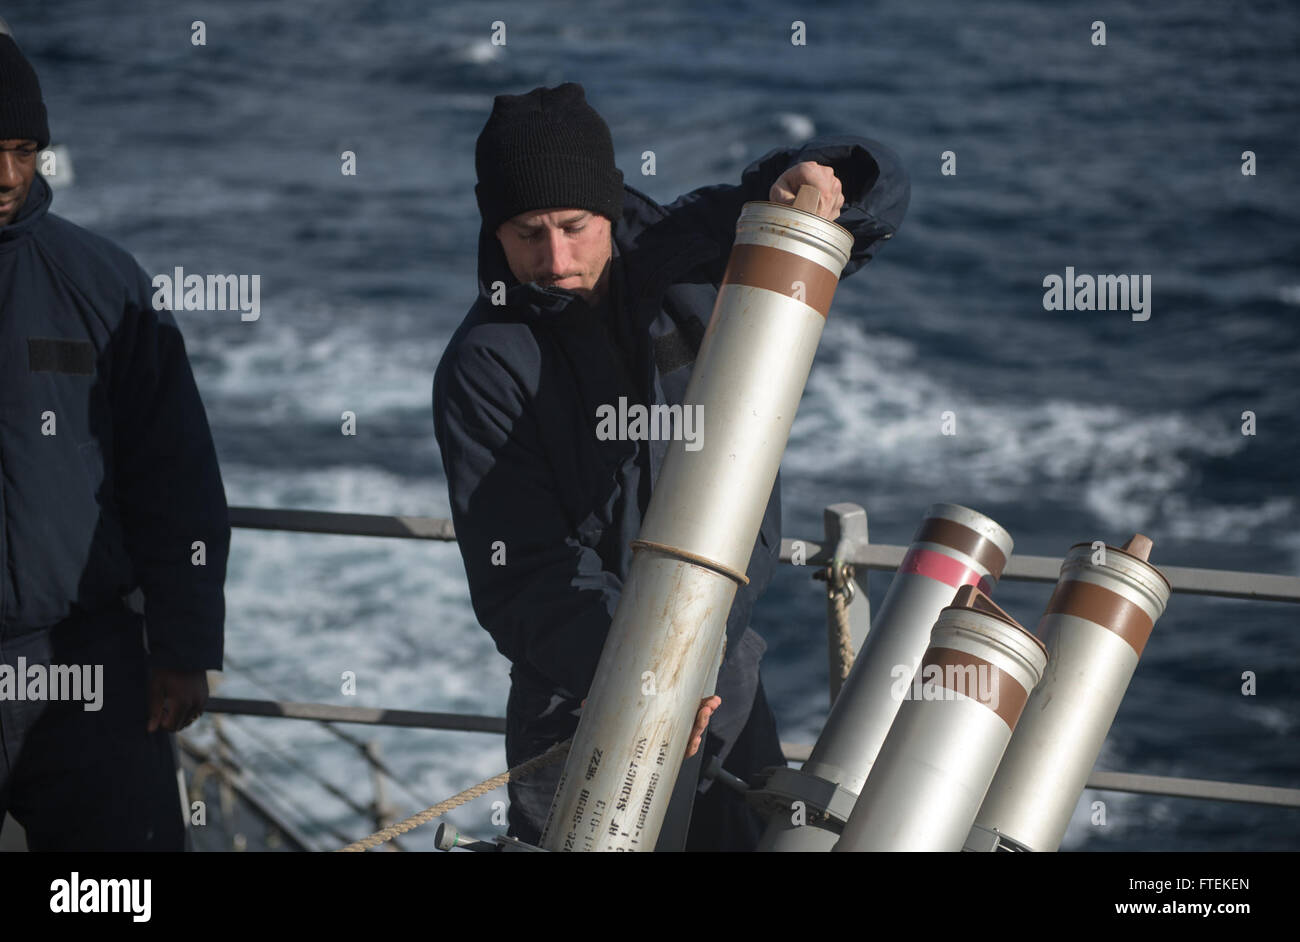 MEDITERRANEAN SEA (Jan. 23, 2015) Cryptologic Technician 2nd Class Thomas Helsel, from Lordstown, Ohio, downloads anti-ship missile defense CHAFF rounds aboard USS Donald Cook (DDG 75) Jan. 23, 2015. Donald Cook, an Arleigh Burke-class guided-missile destroyer, forward-deployed to Rota, Spain, is conducting naval operations in the U.S. 6th Fleet area of operations in support of U.S. national security interests in Europe. Stock Photo